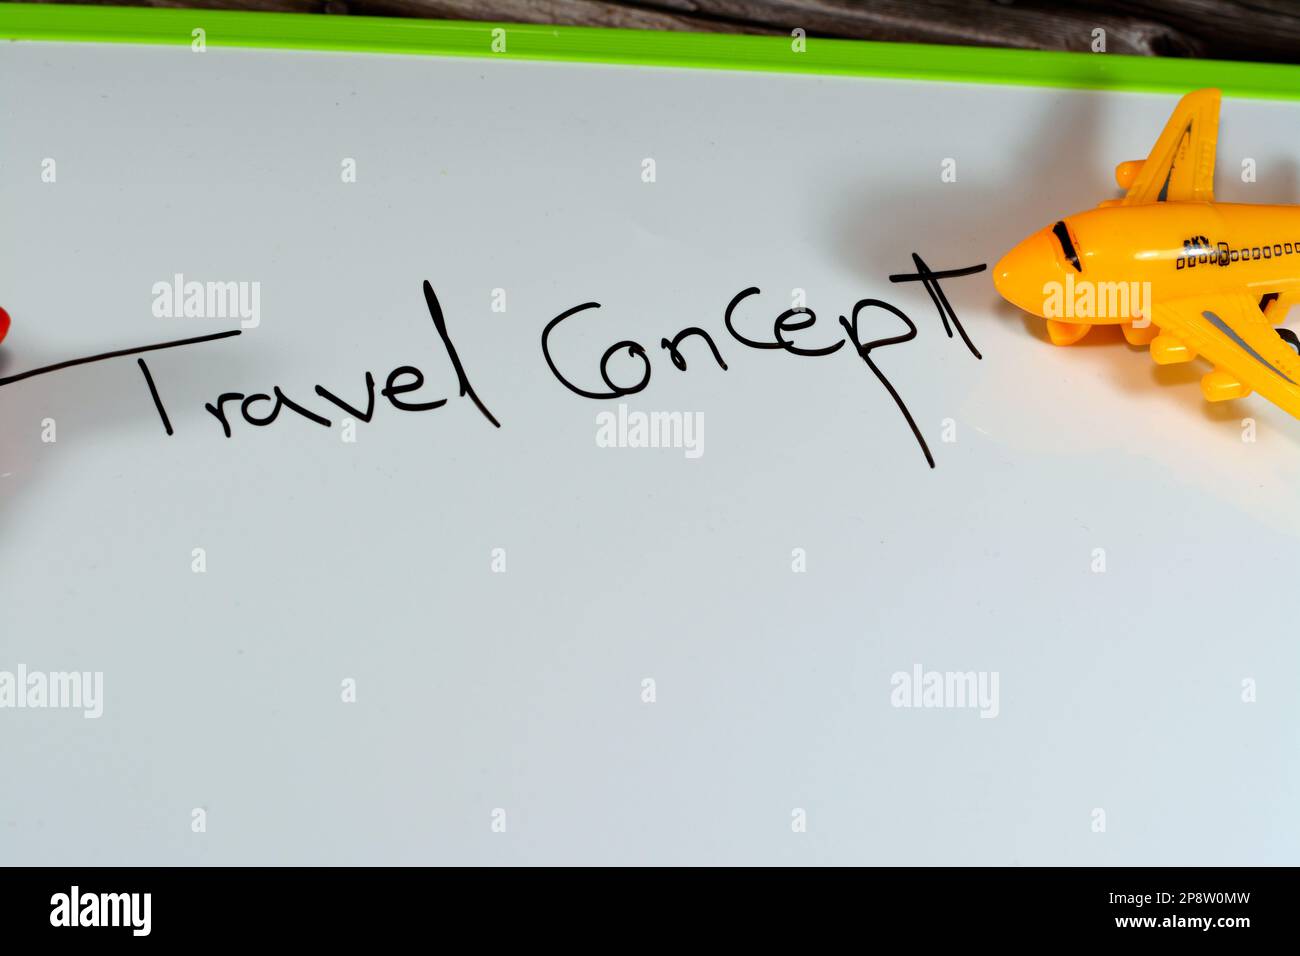 English text on a board ( Travel concept ) with a small airplane beside the text, business flights, tourism, traveling around the world, countries tou Stock Photo